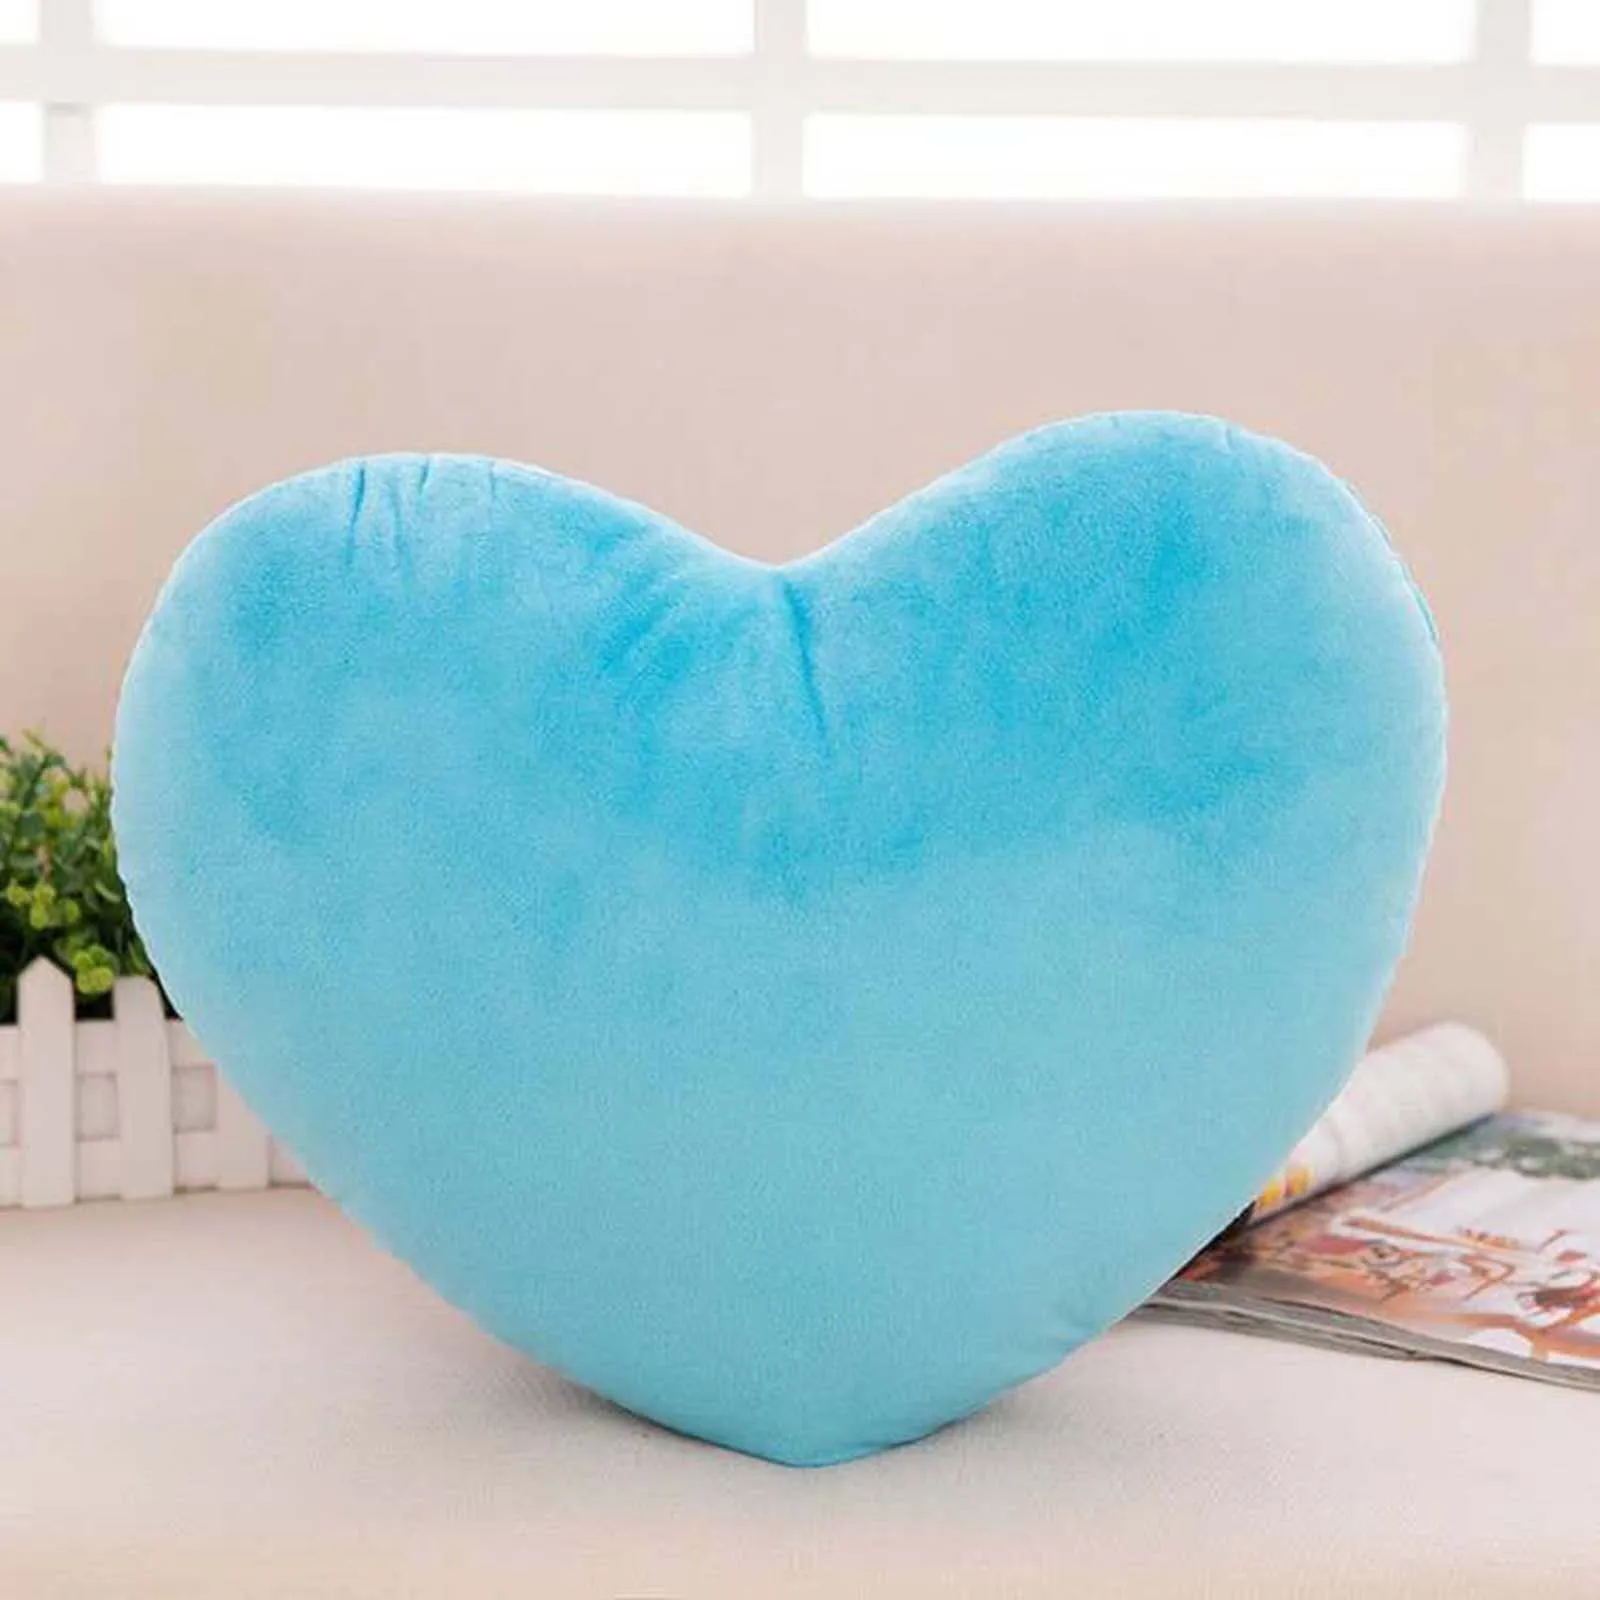 Valentines Day Decor Pillow Living Room Bedroom Heart Shape Decorative Throw Pillow Cotton Soft Doll Lover Gift 15//20/30/40cm